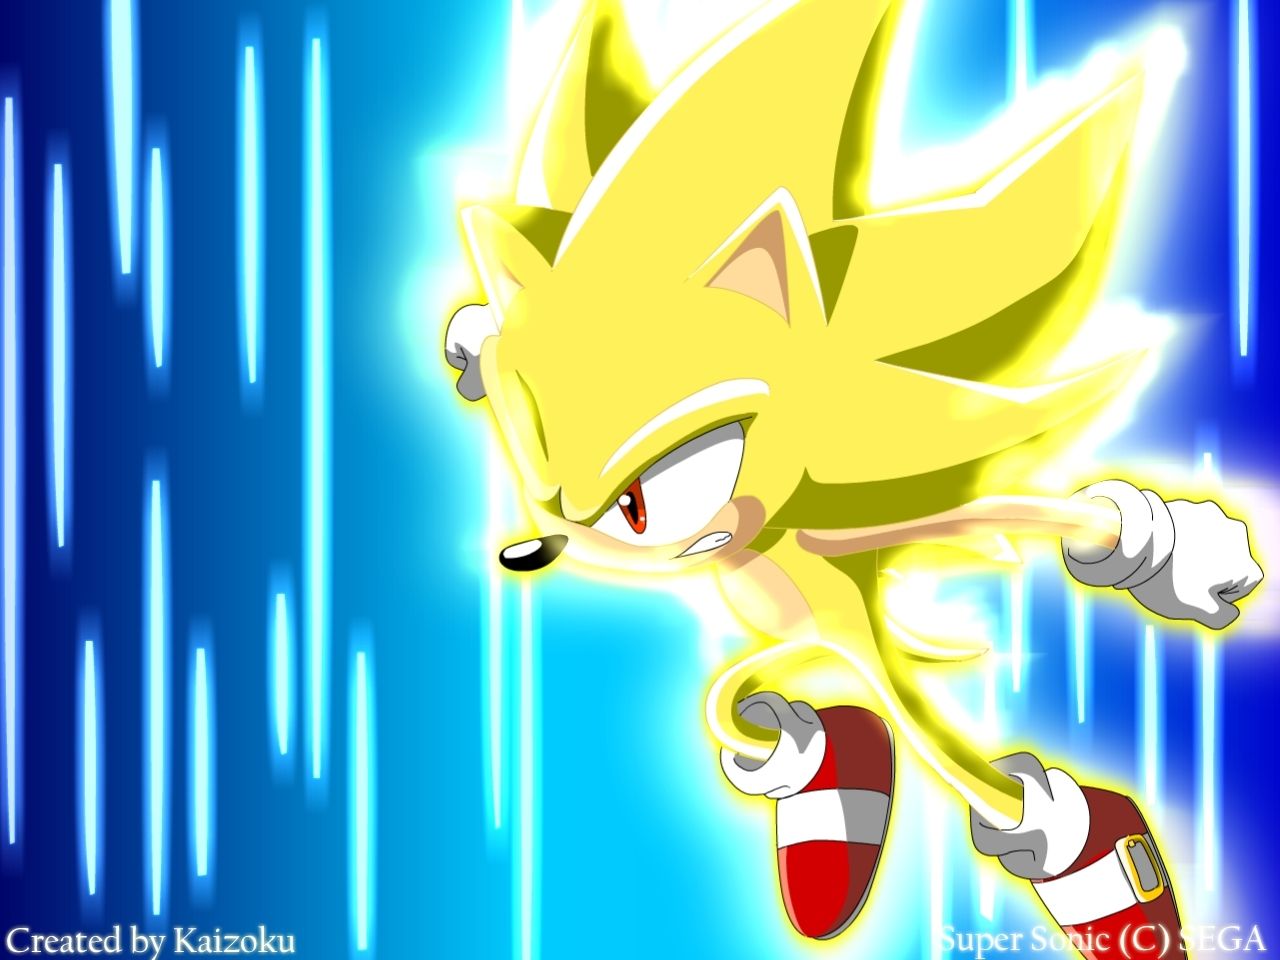 super sonic wallpaper,sonic the hedgehog,cartoon,fictional character,graphic design,anime